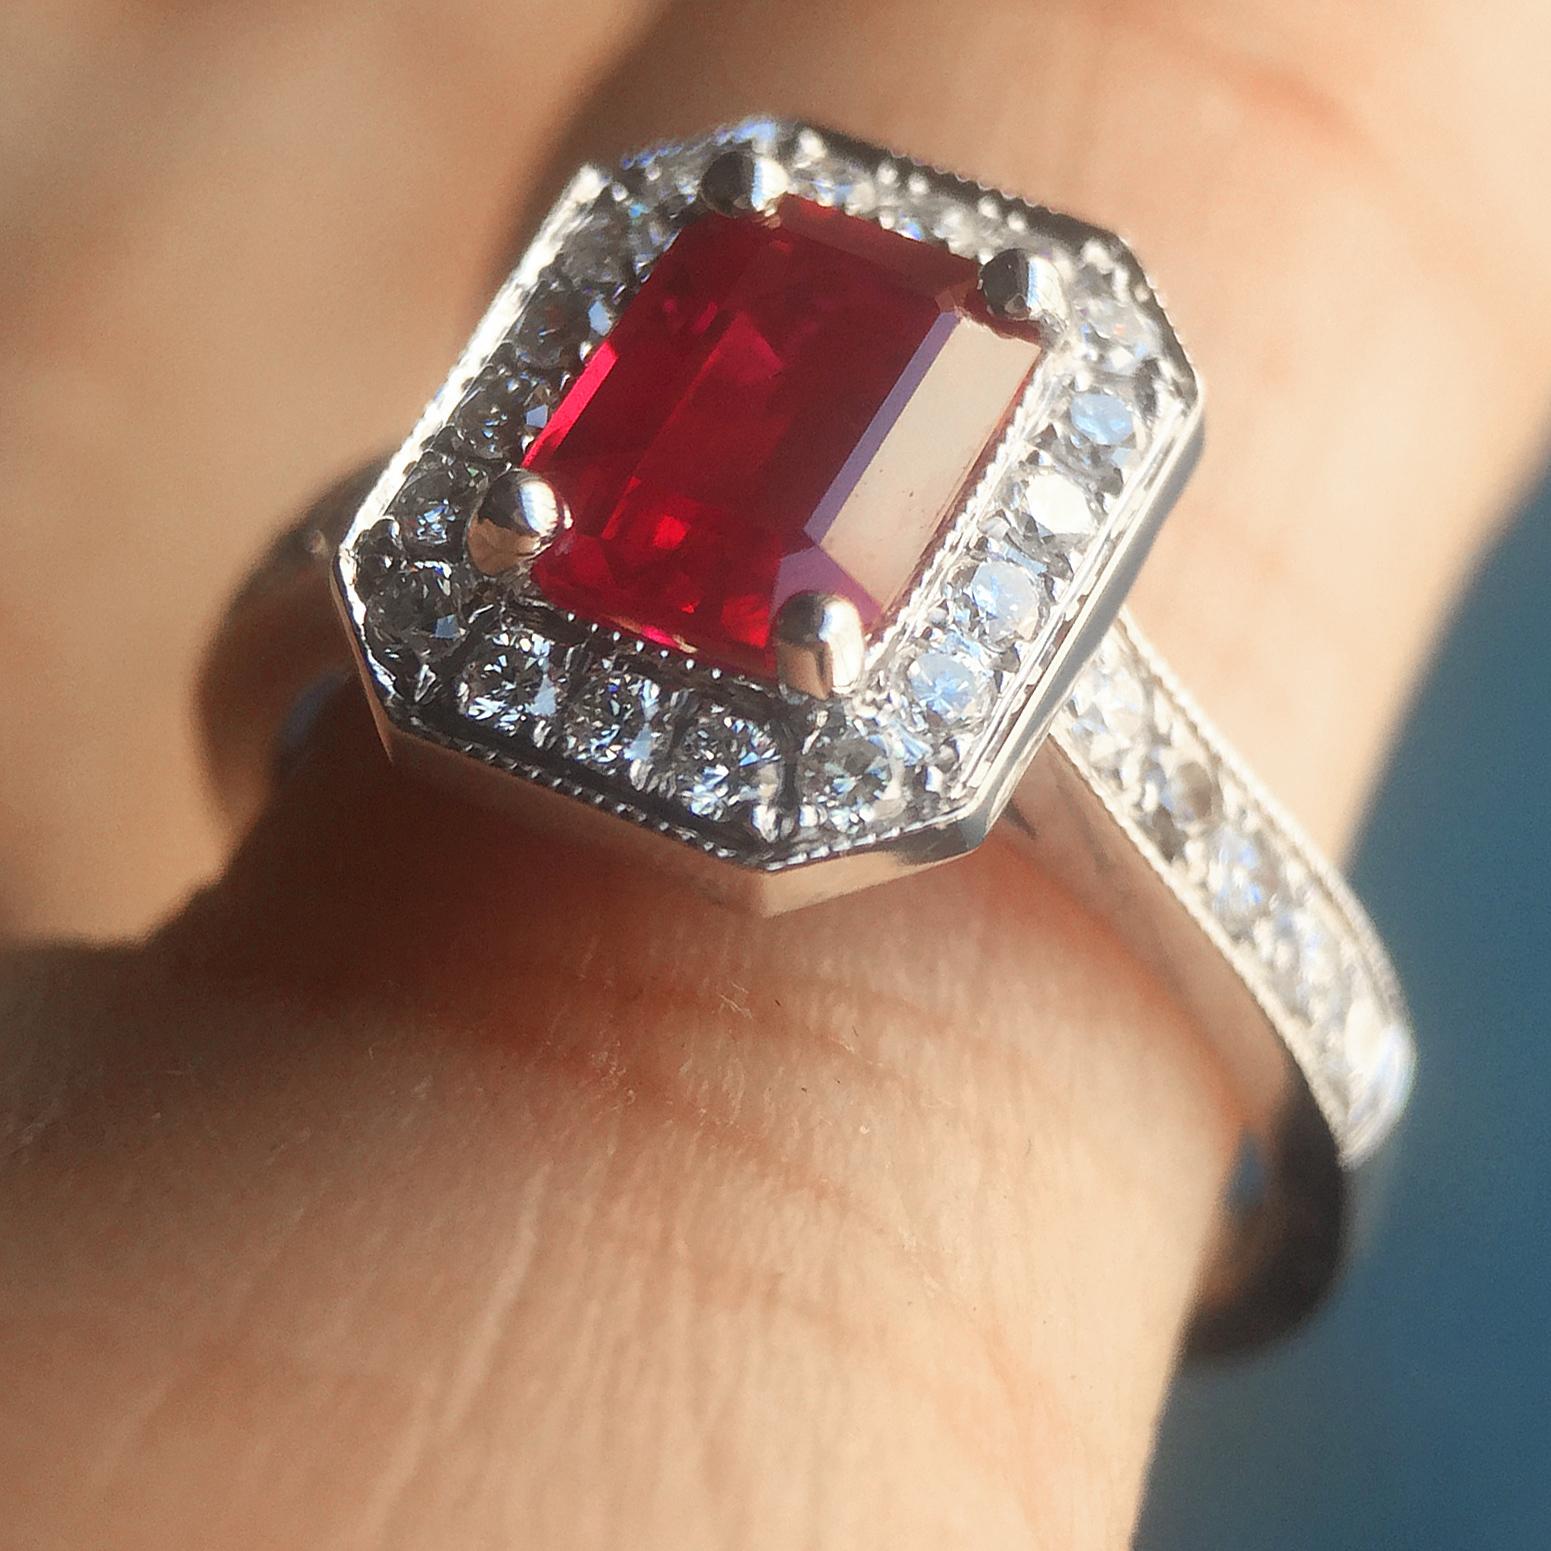 Ring will be made to order, please allow 3-6 weeks, if you need it sooner let us know and we will try to accommodate you.

1. Carat Weight: 1.00+
2. Color: Red
3. Tone:  Medium - Nice, 7.0 Out of 10
4. Hue: Fancy Red.
3. Clarity: Good See Photo
4.